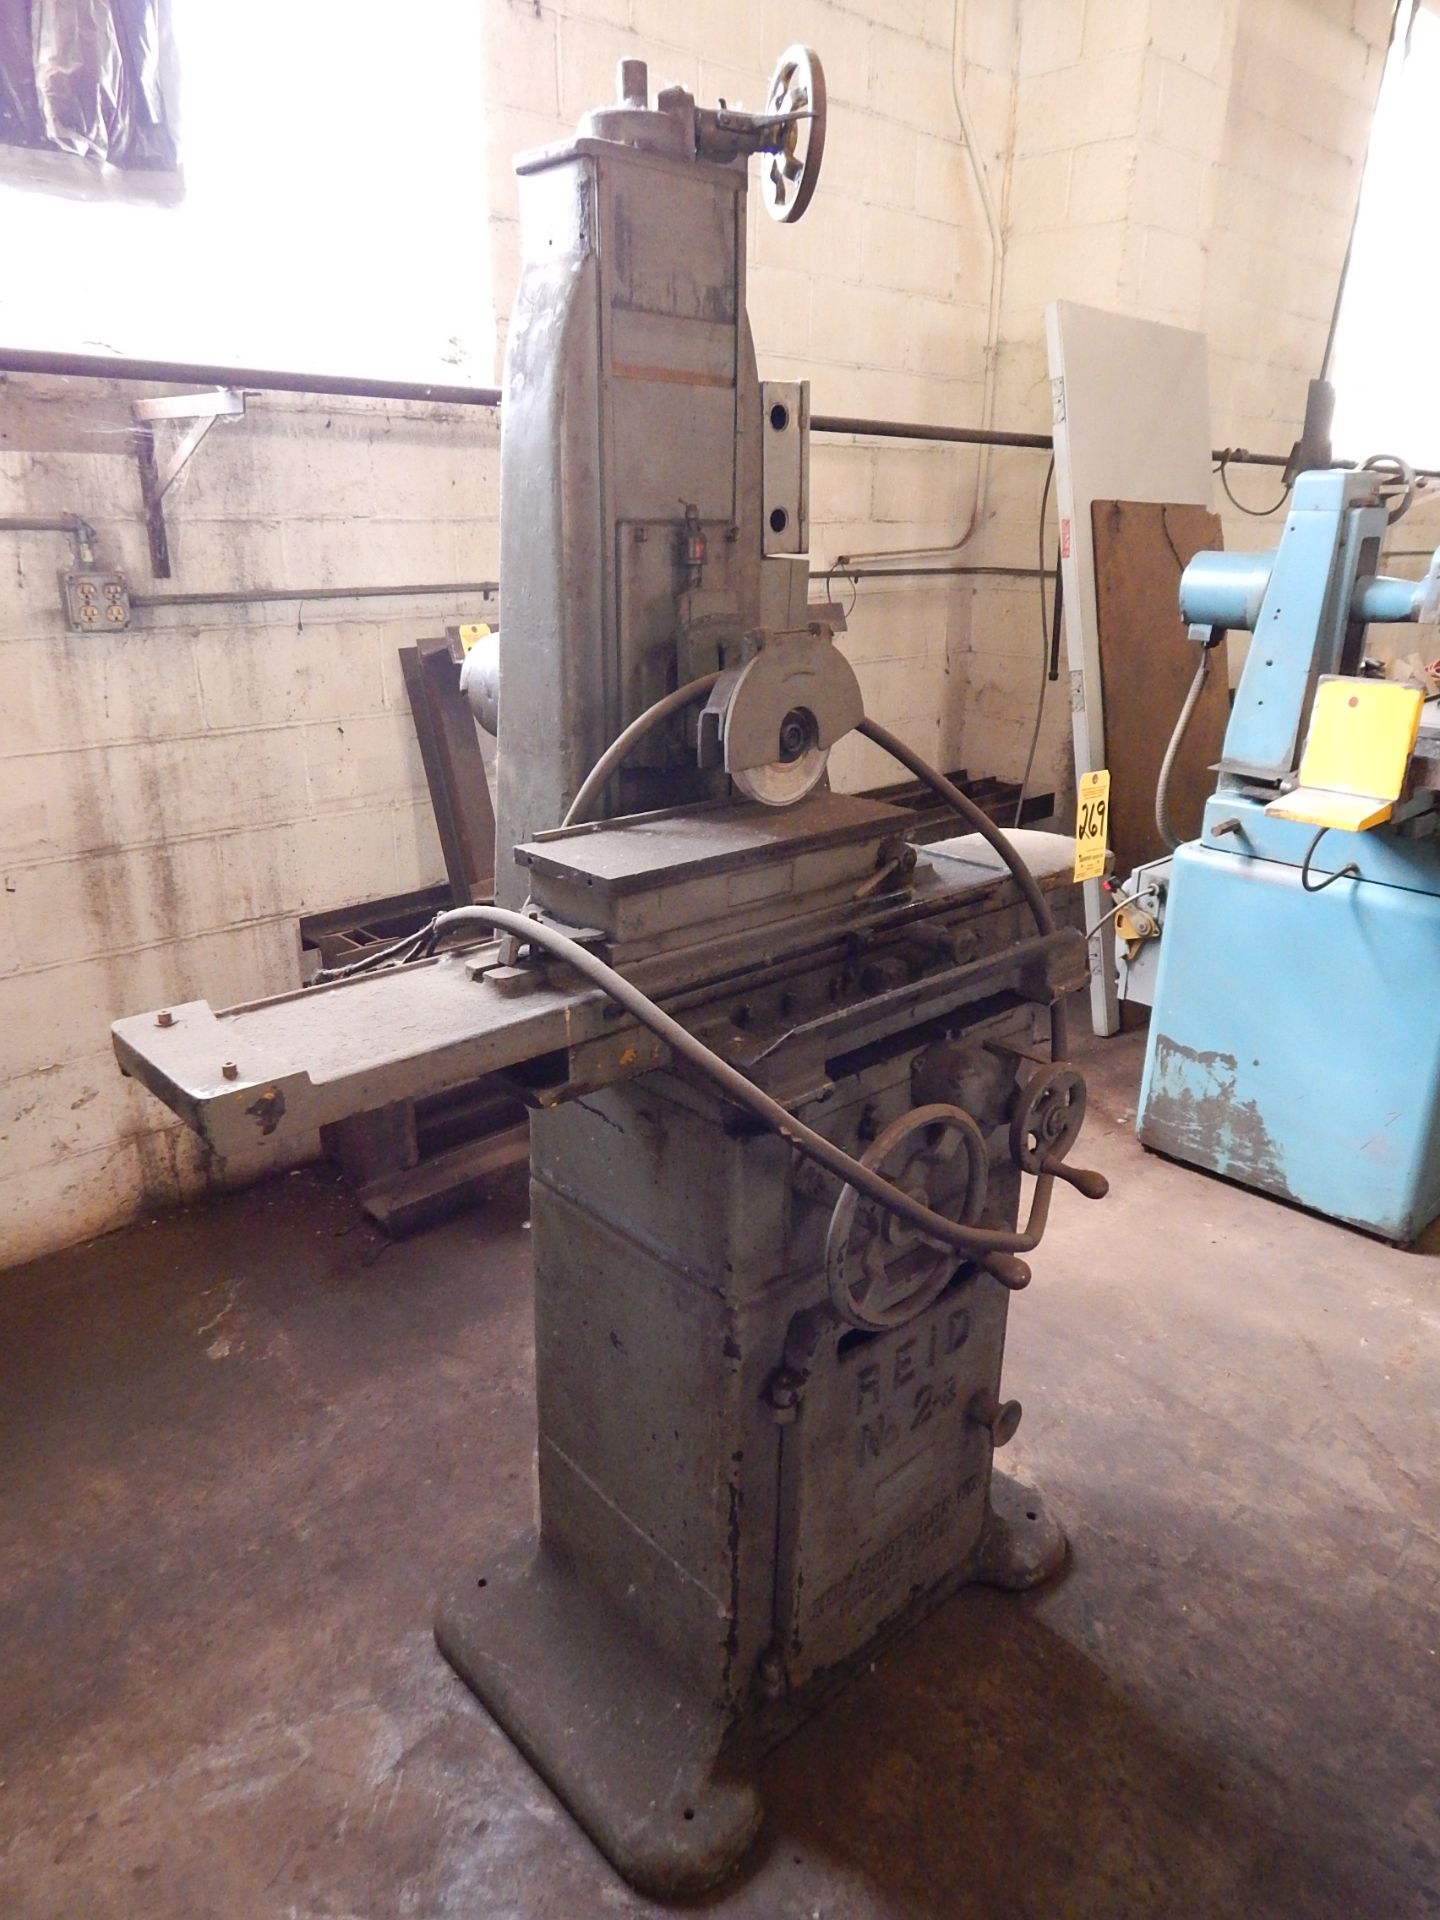 Reid No. 2-3 Surface Grinder, 6 In. X 18 In. Chuck, Loading Fee $50.00